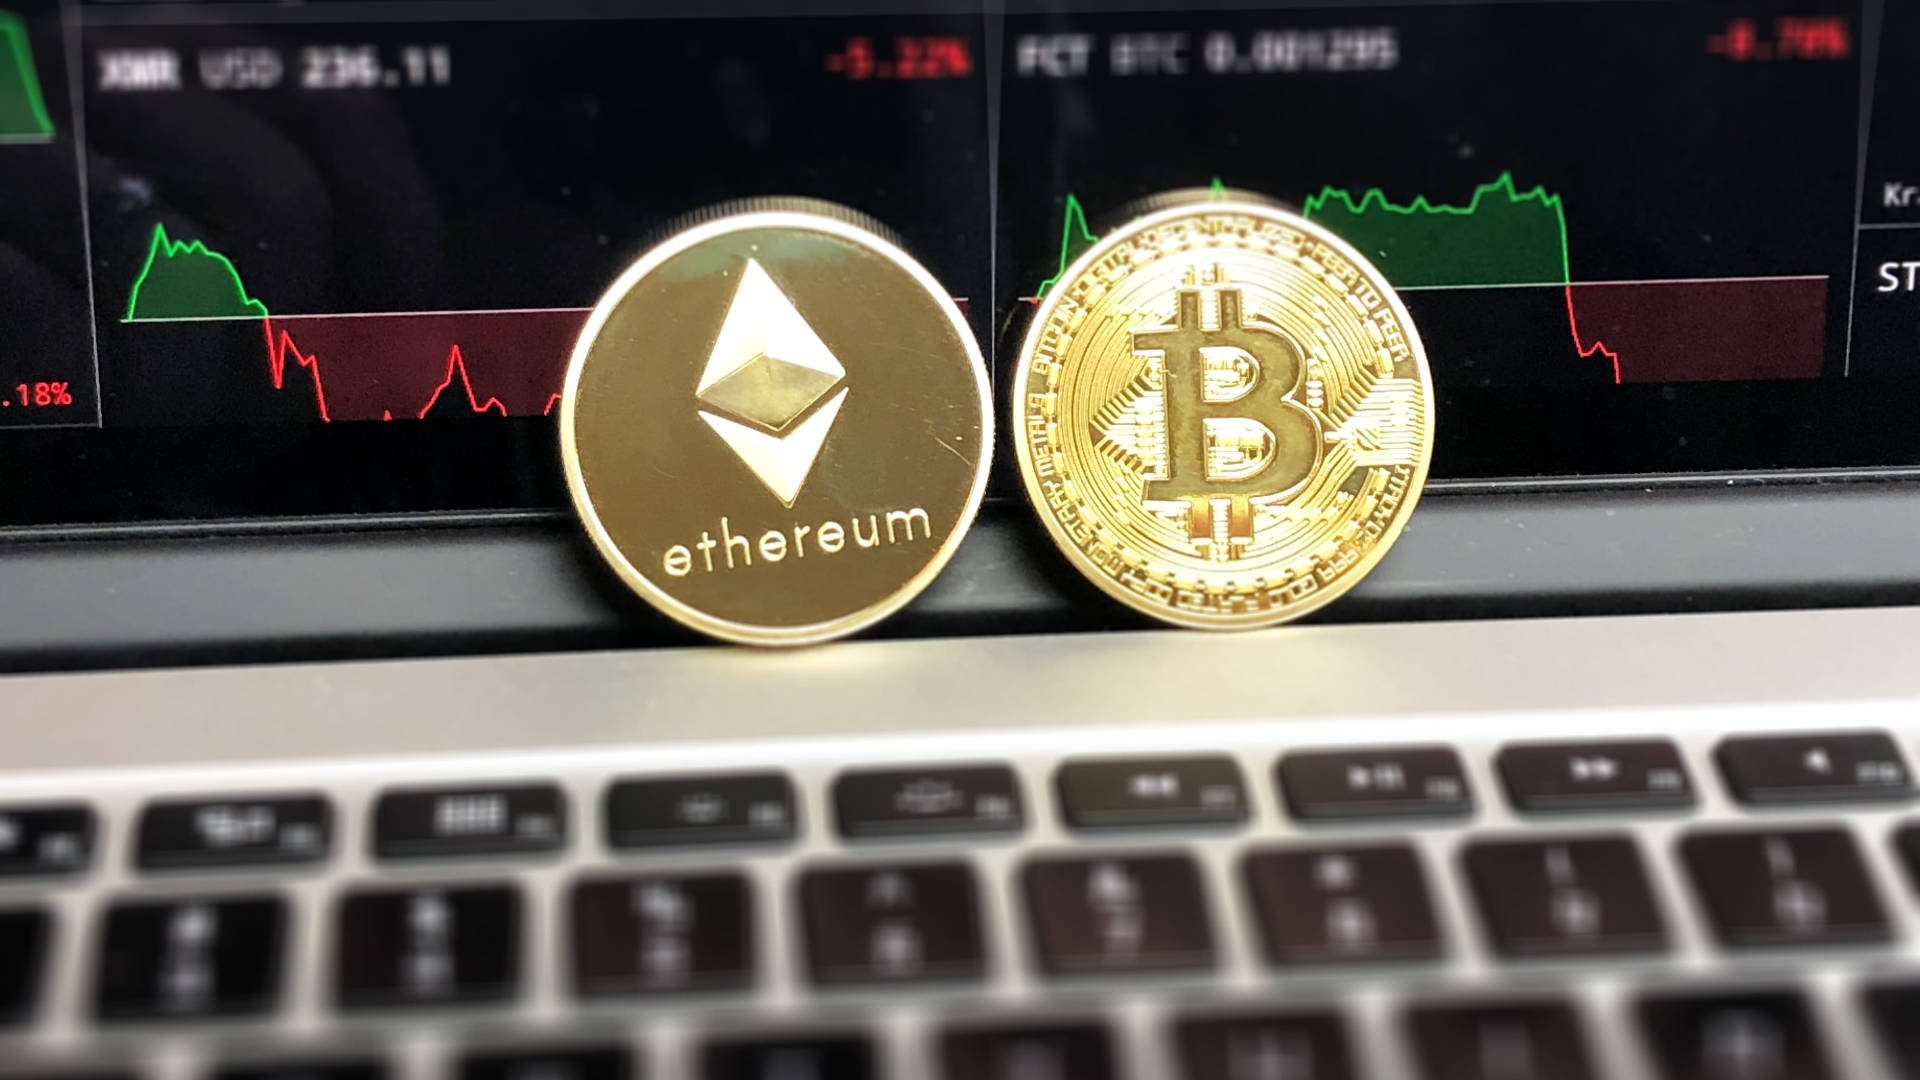 Ethereum And Bitcoin On Laptop Background